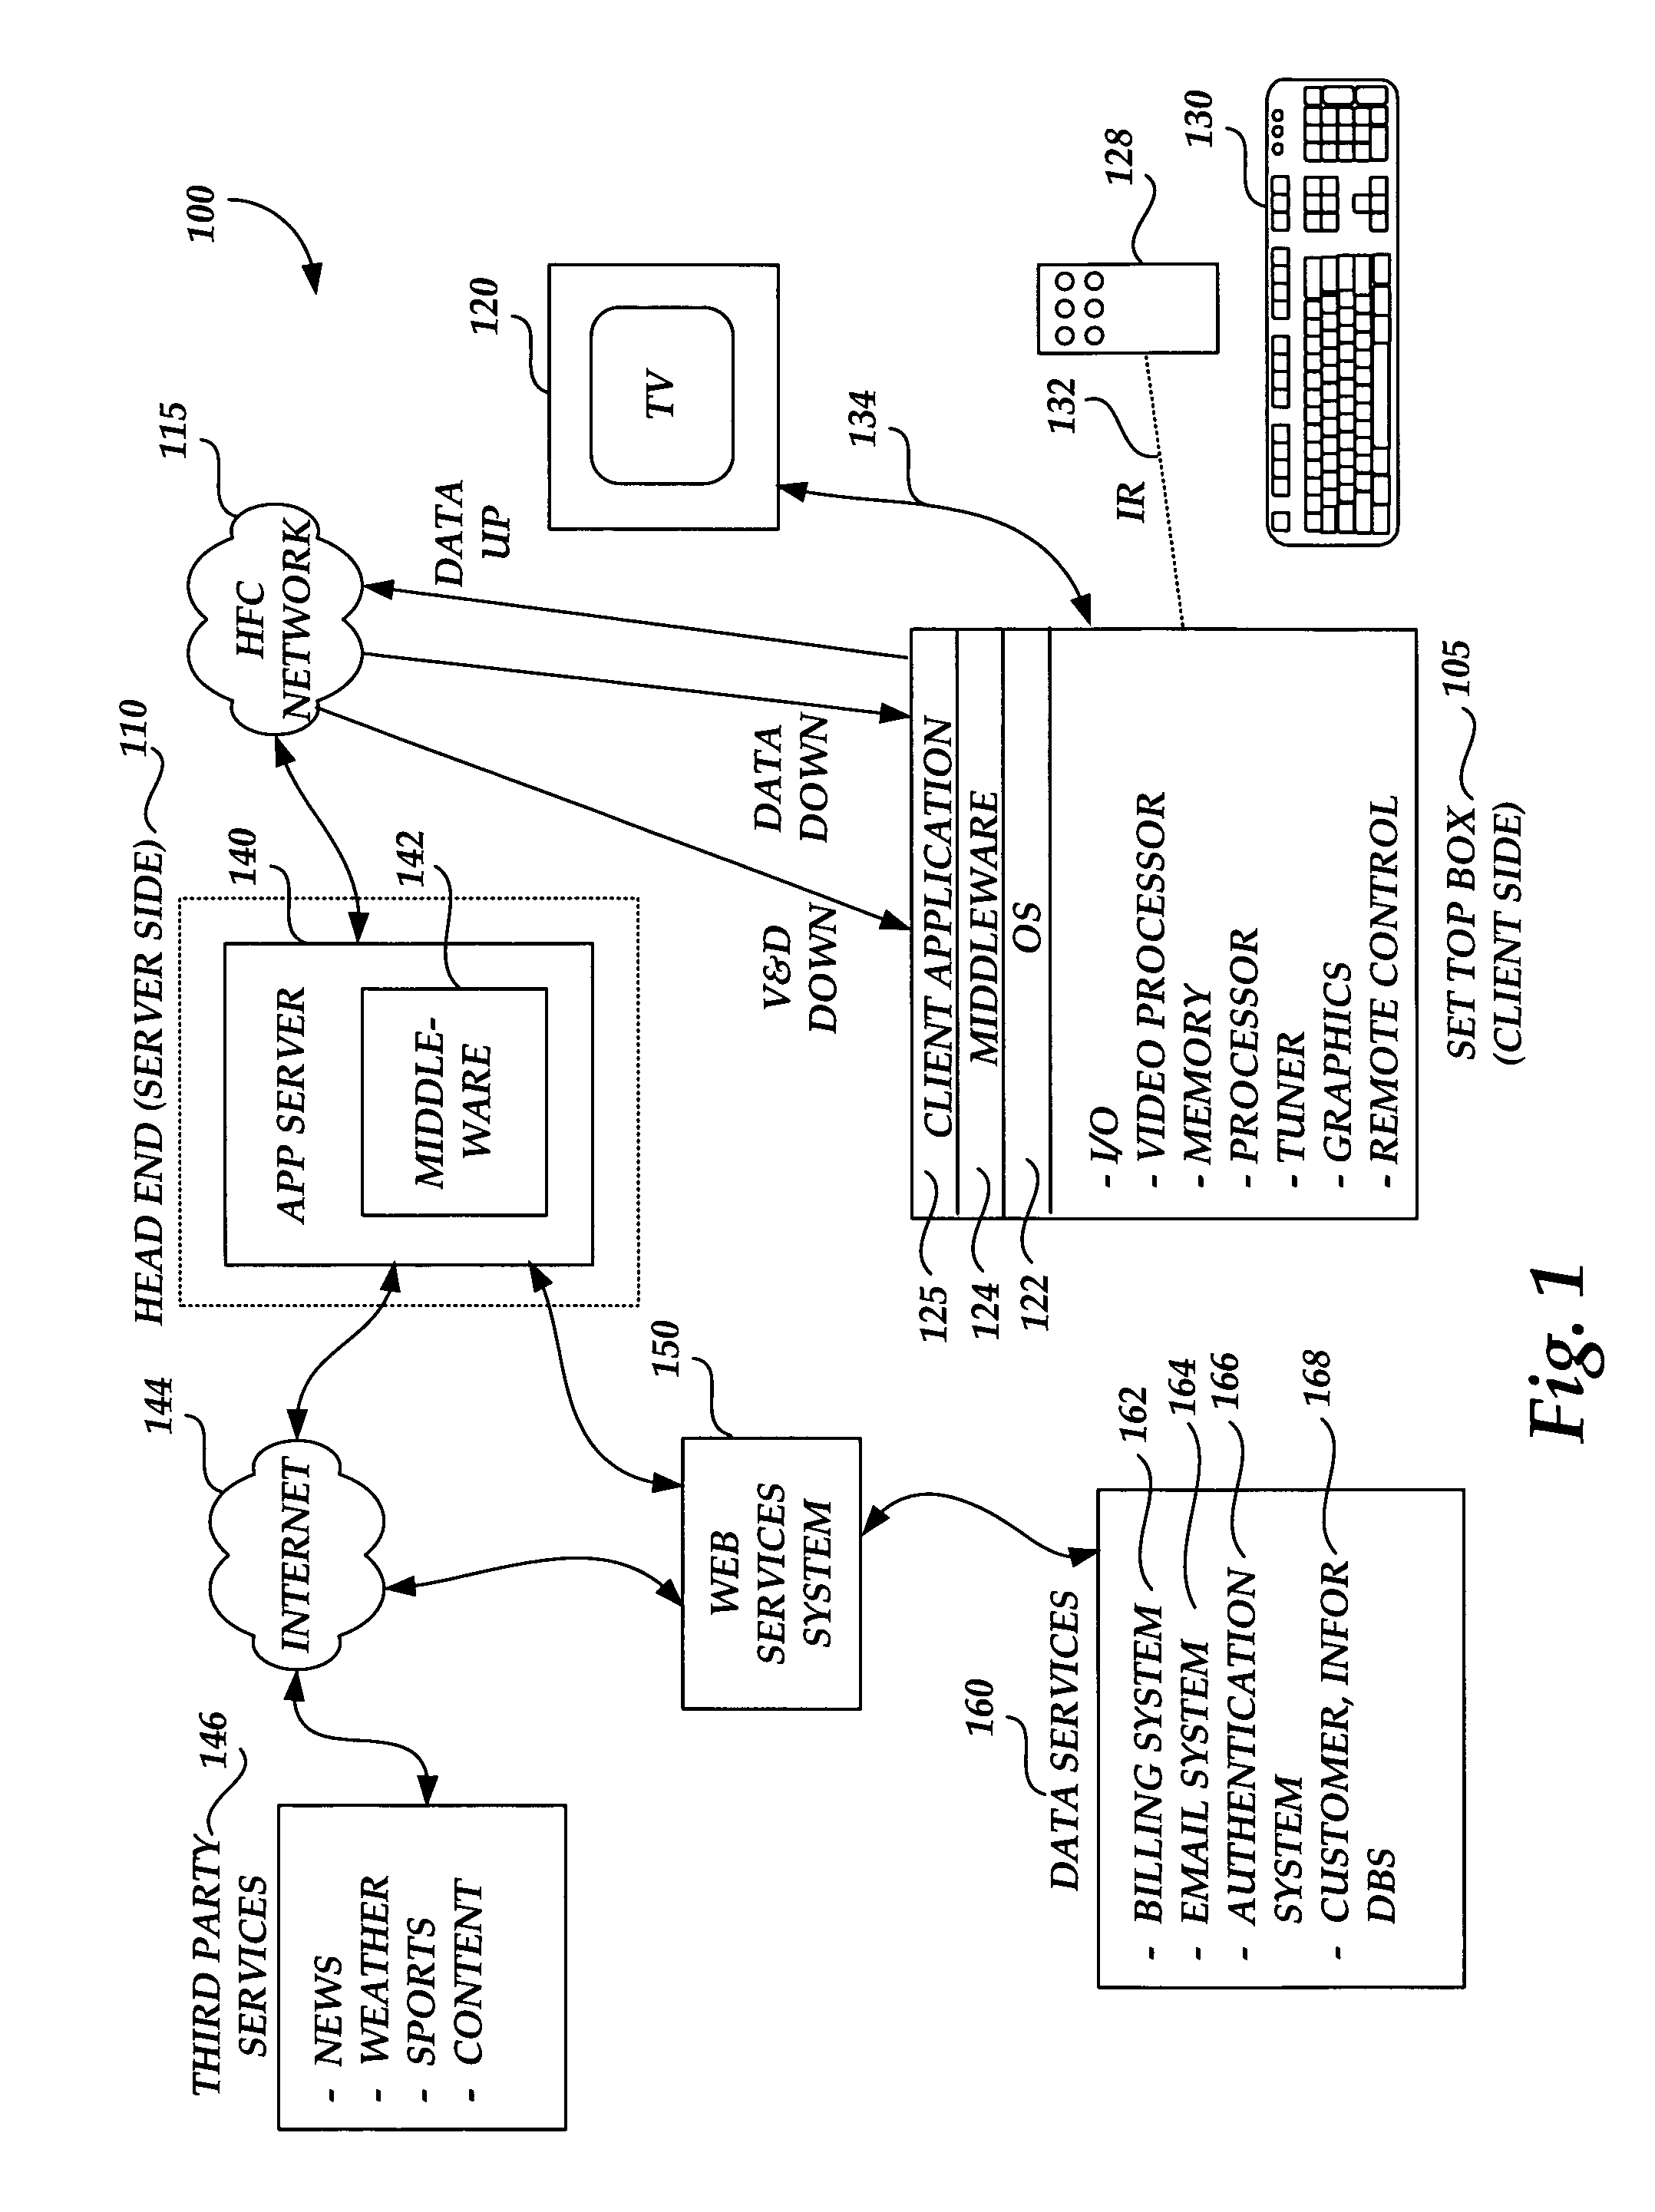 Methods and systems for providing product and services upgrades and work order status in a cable services network